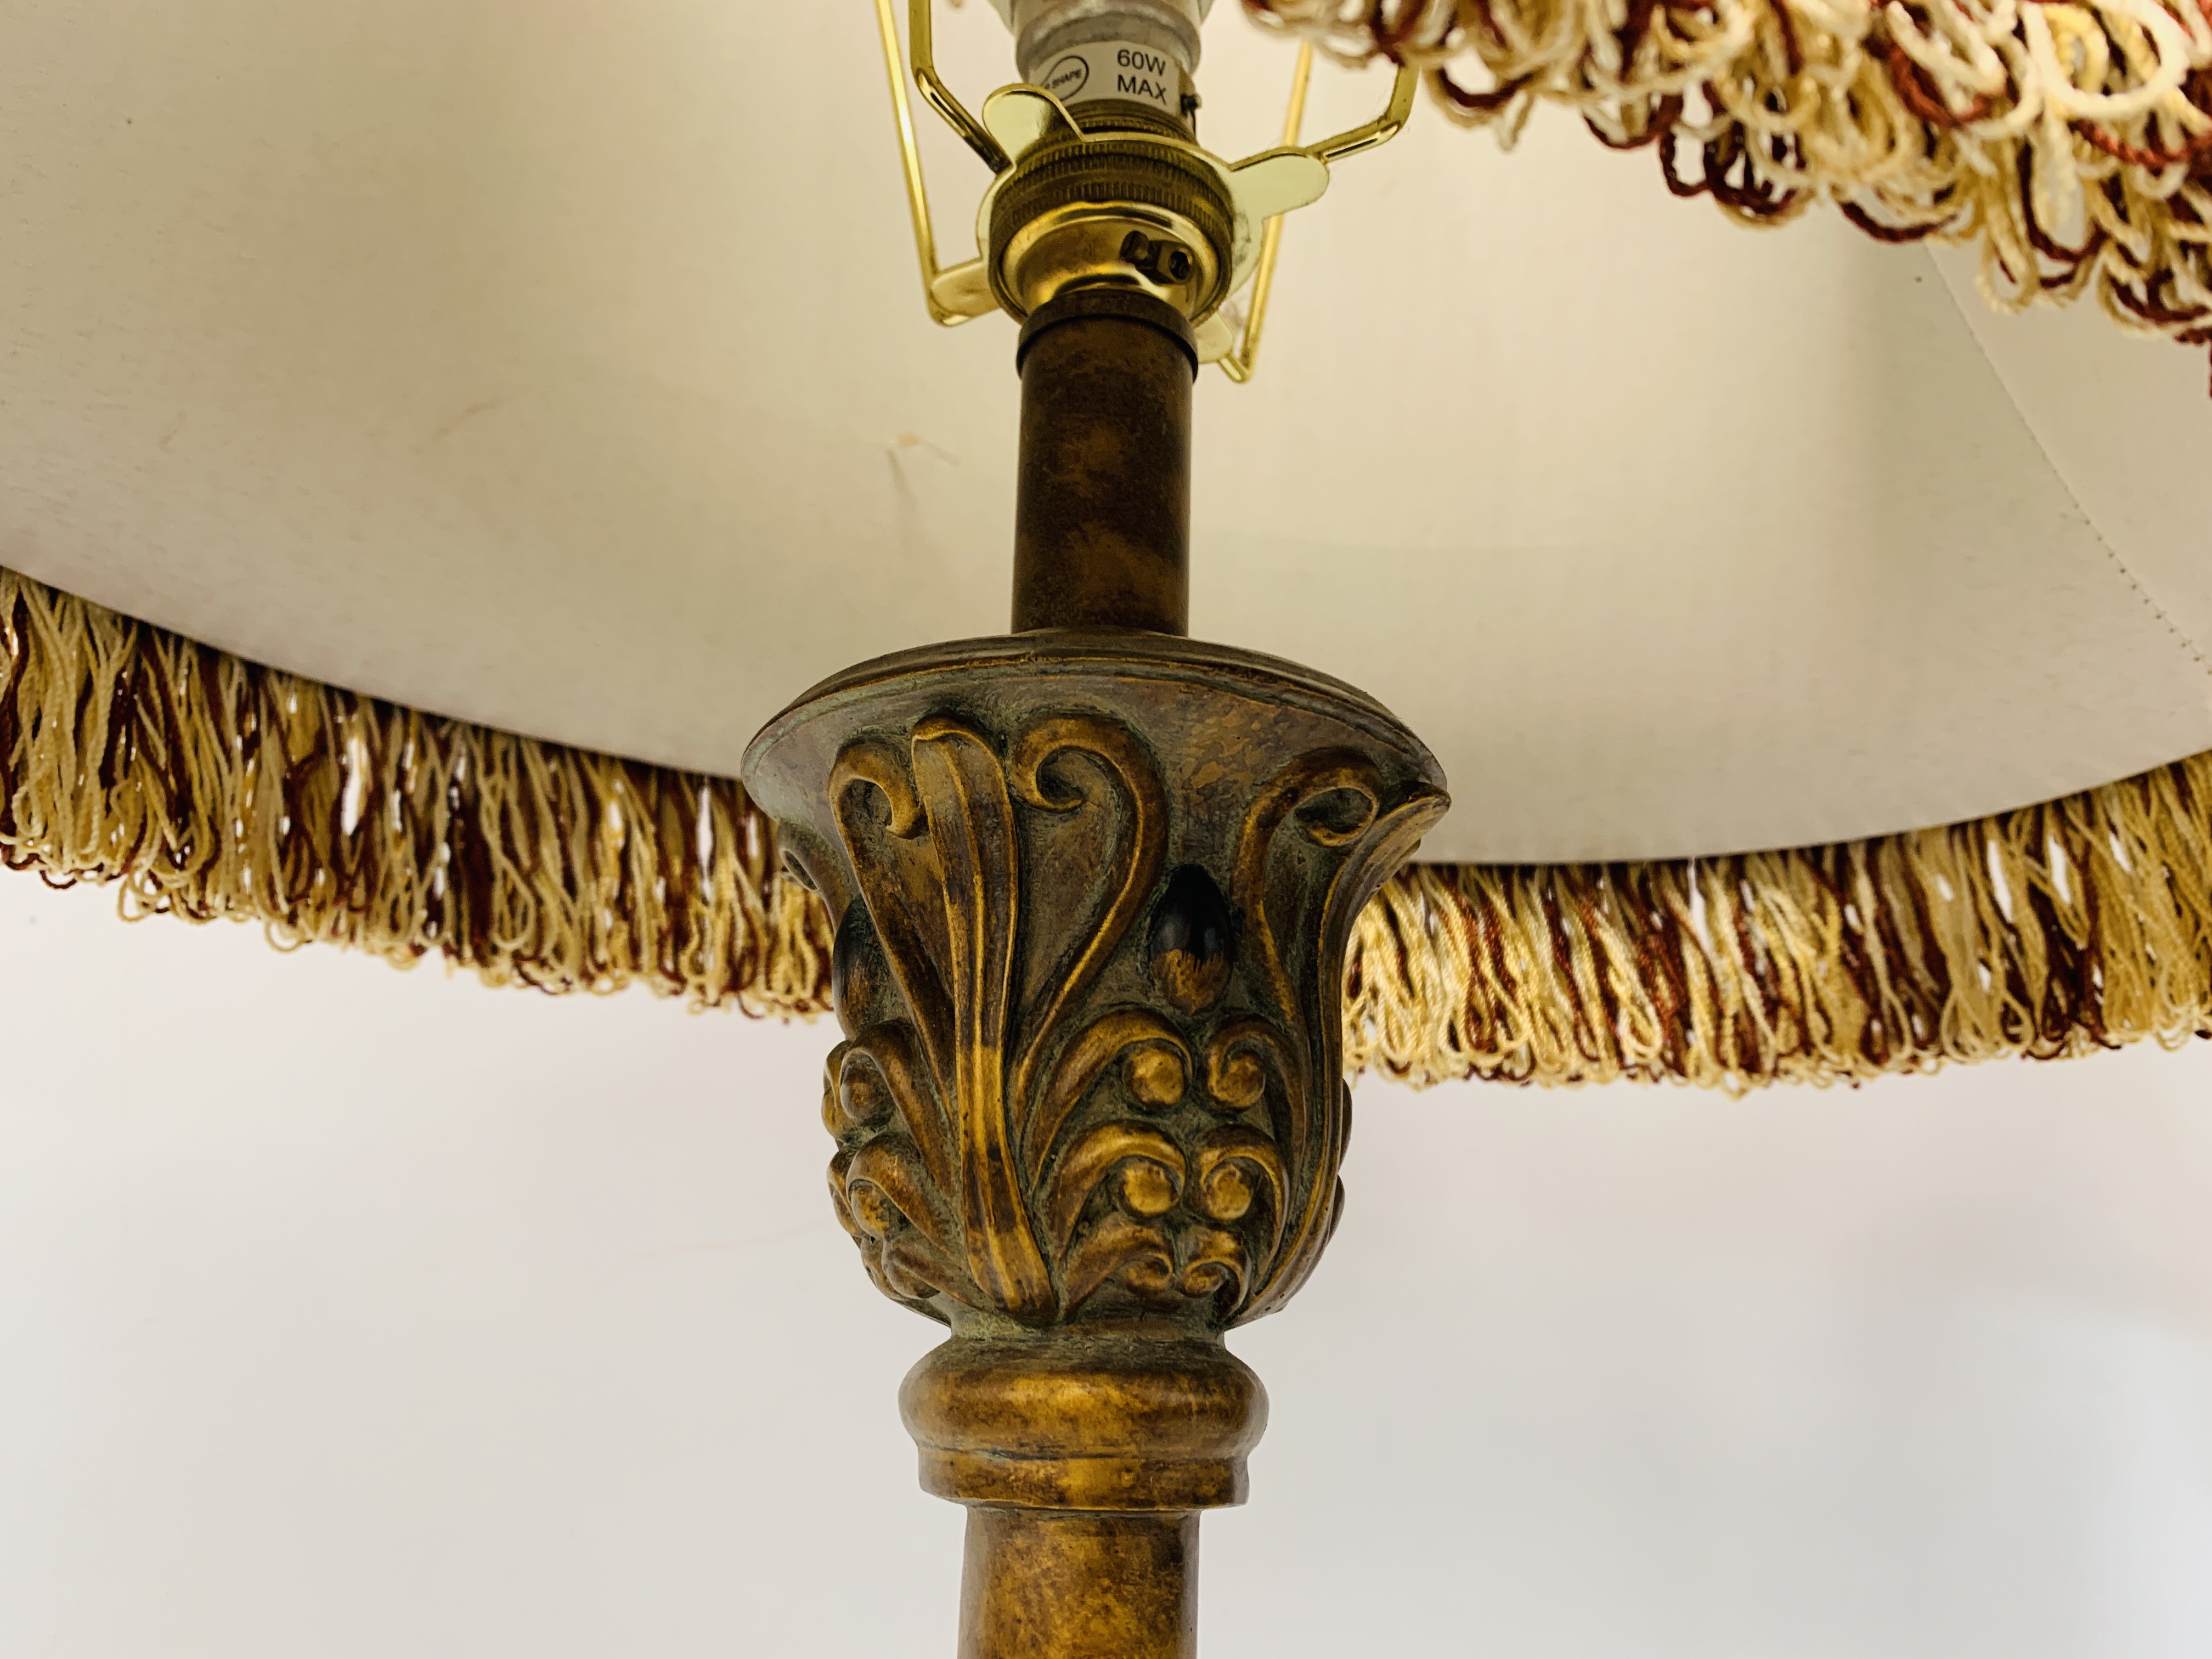 PAIR OF CLASSICAL ANTIQUE EFFECT TABLE LAMPS WITH RED STRIPED FRINGED SHADES HEIGHT 77CM. - Image 3 of 7